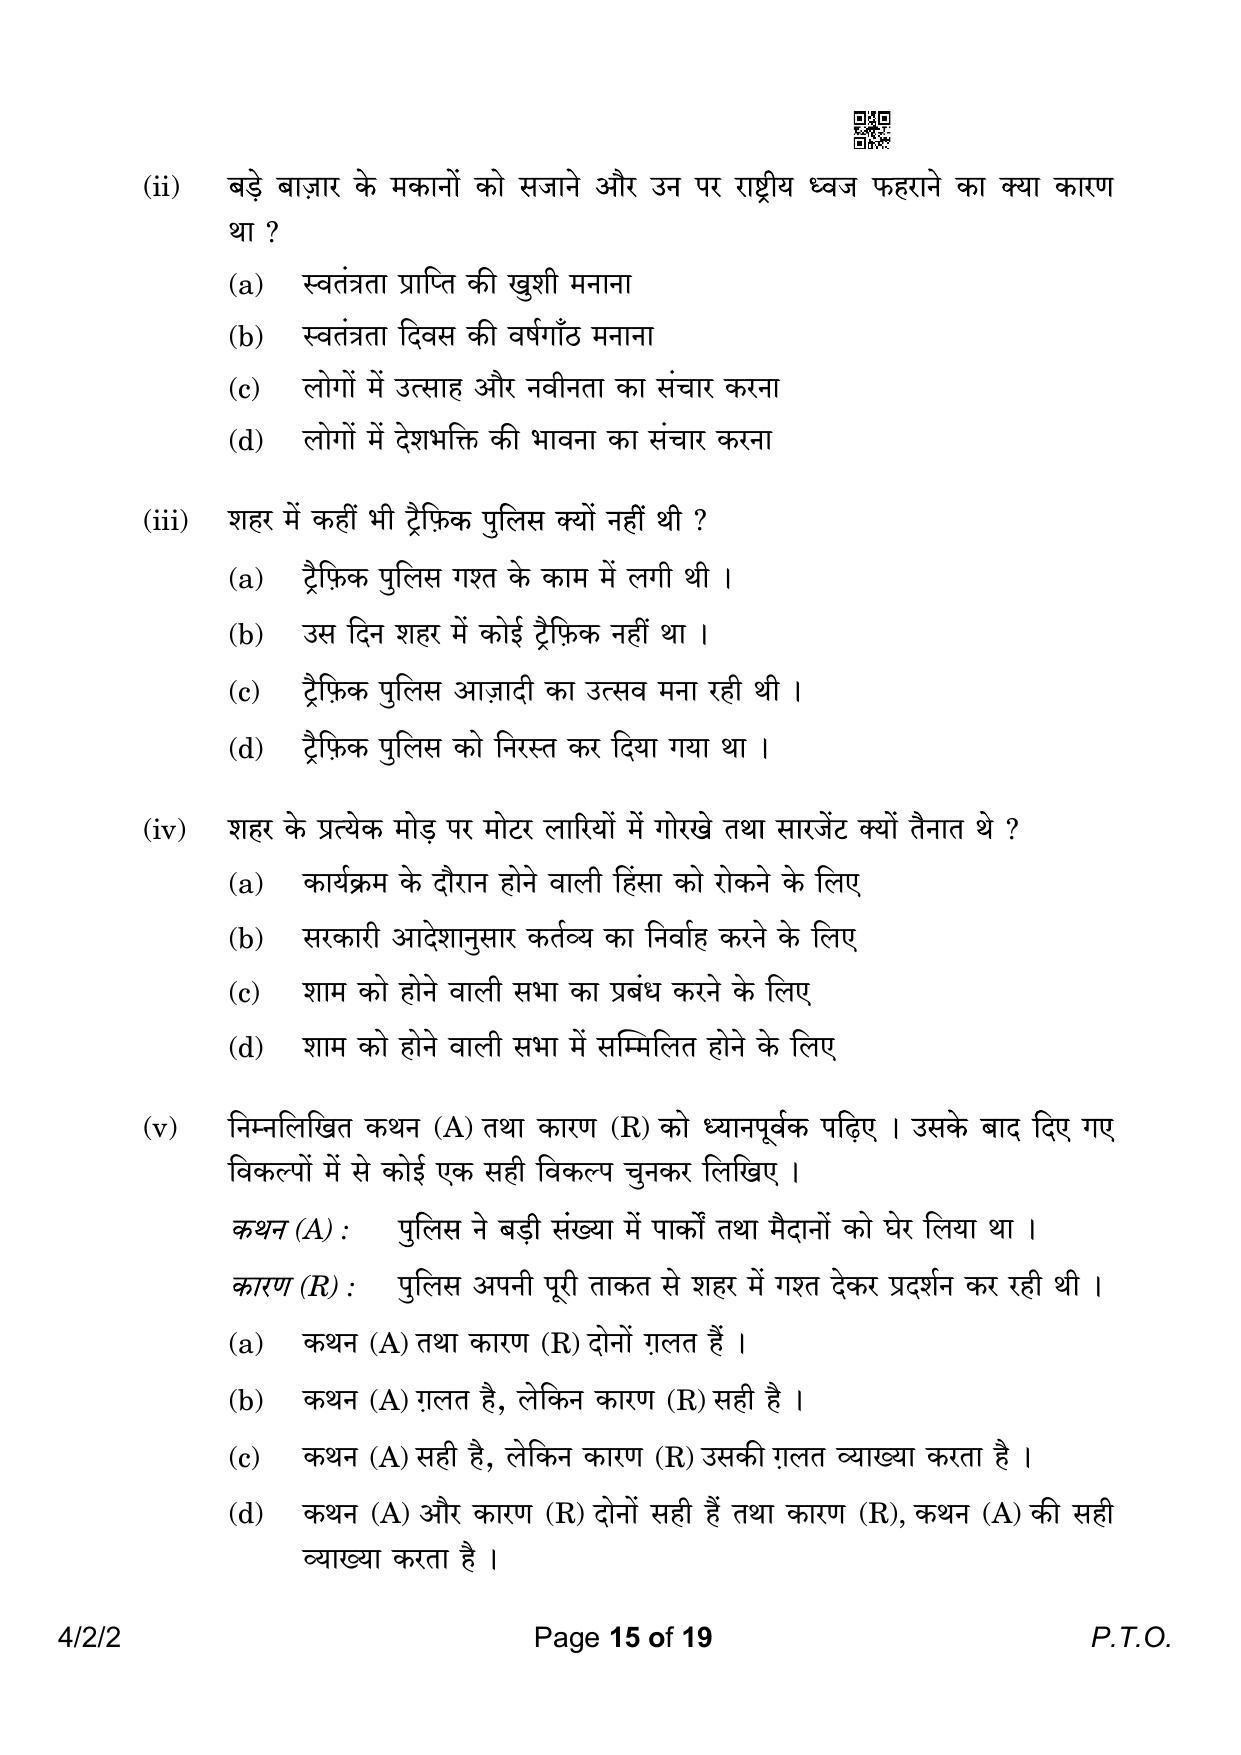 CBSE Class 10 4-2-2 Hindi B 2023 Question Paper - Page 15